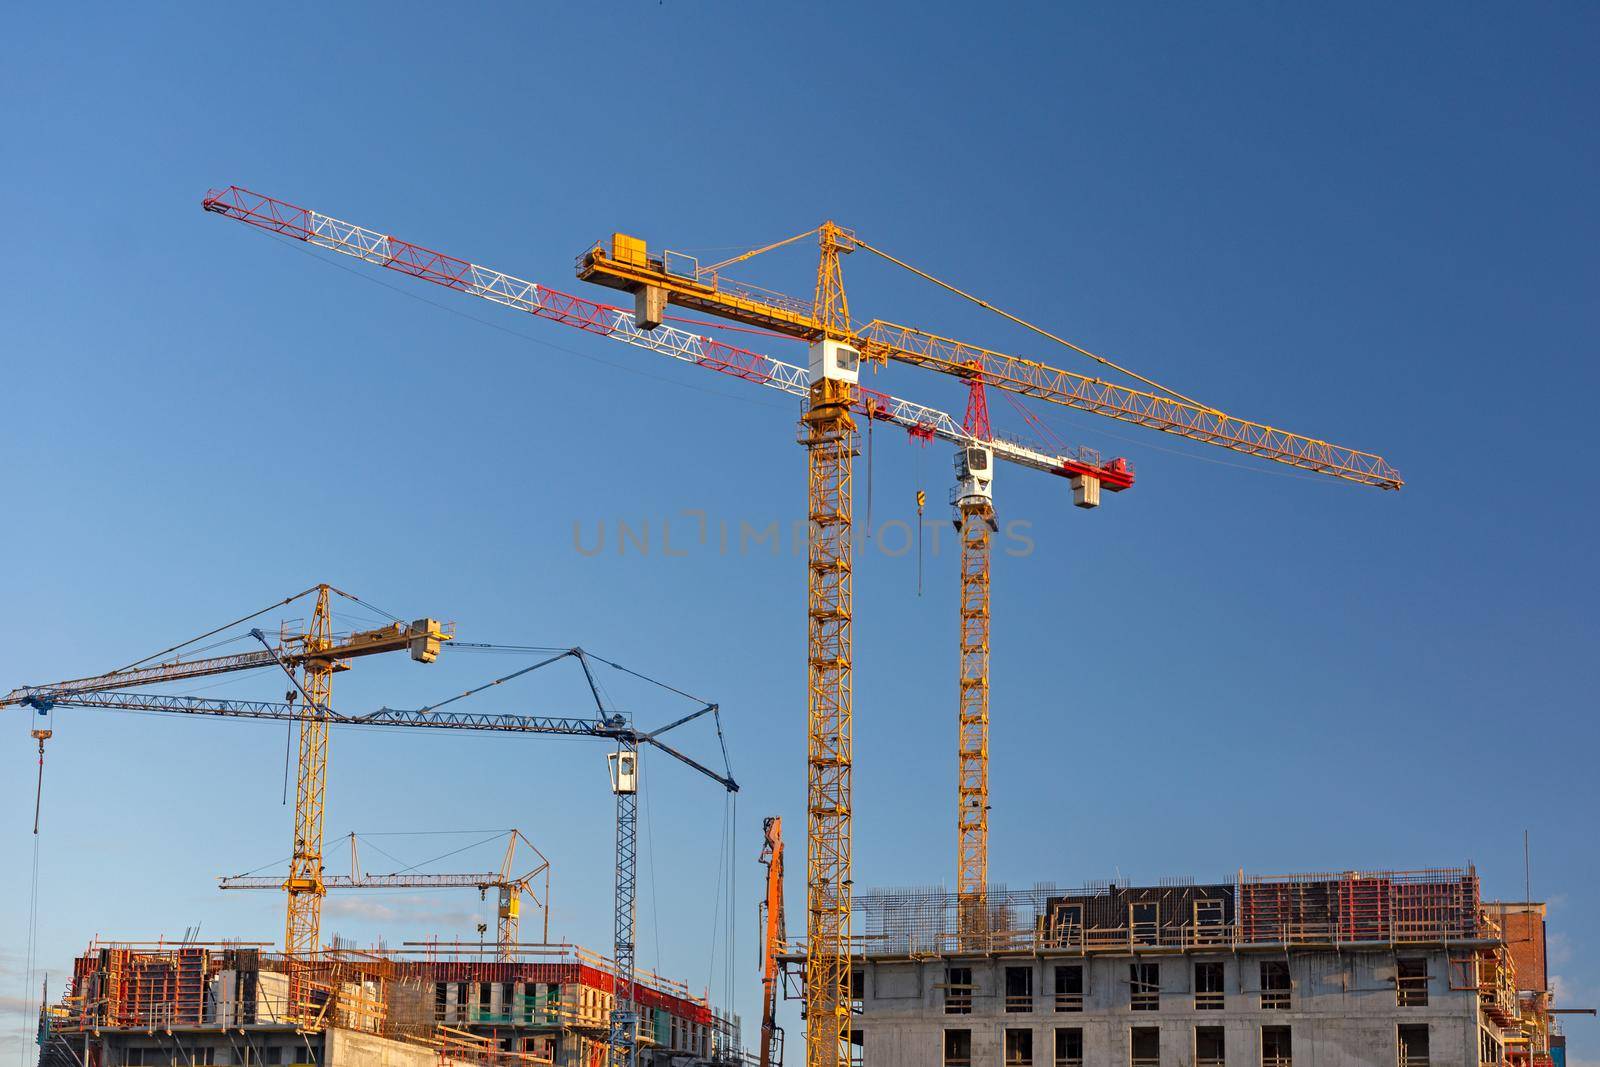 Building industry landscape - large cranes on the construction site on a blue sky background.